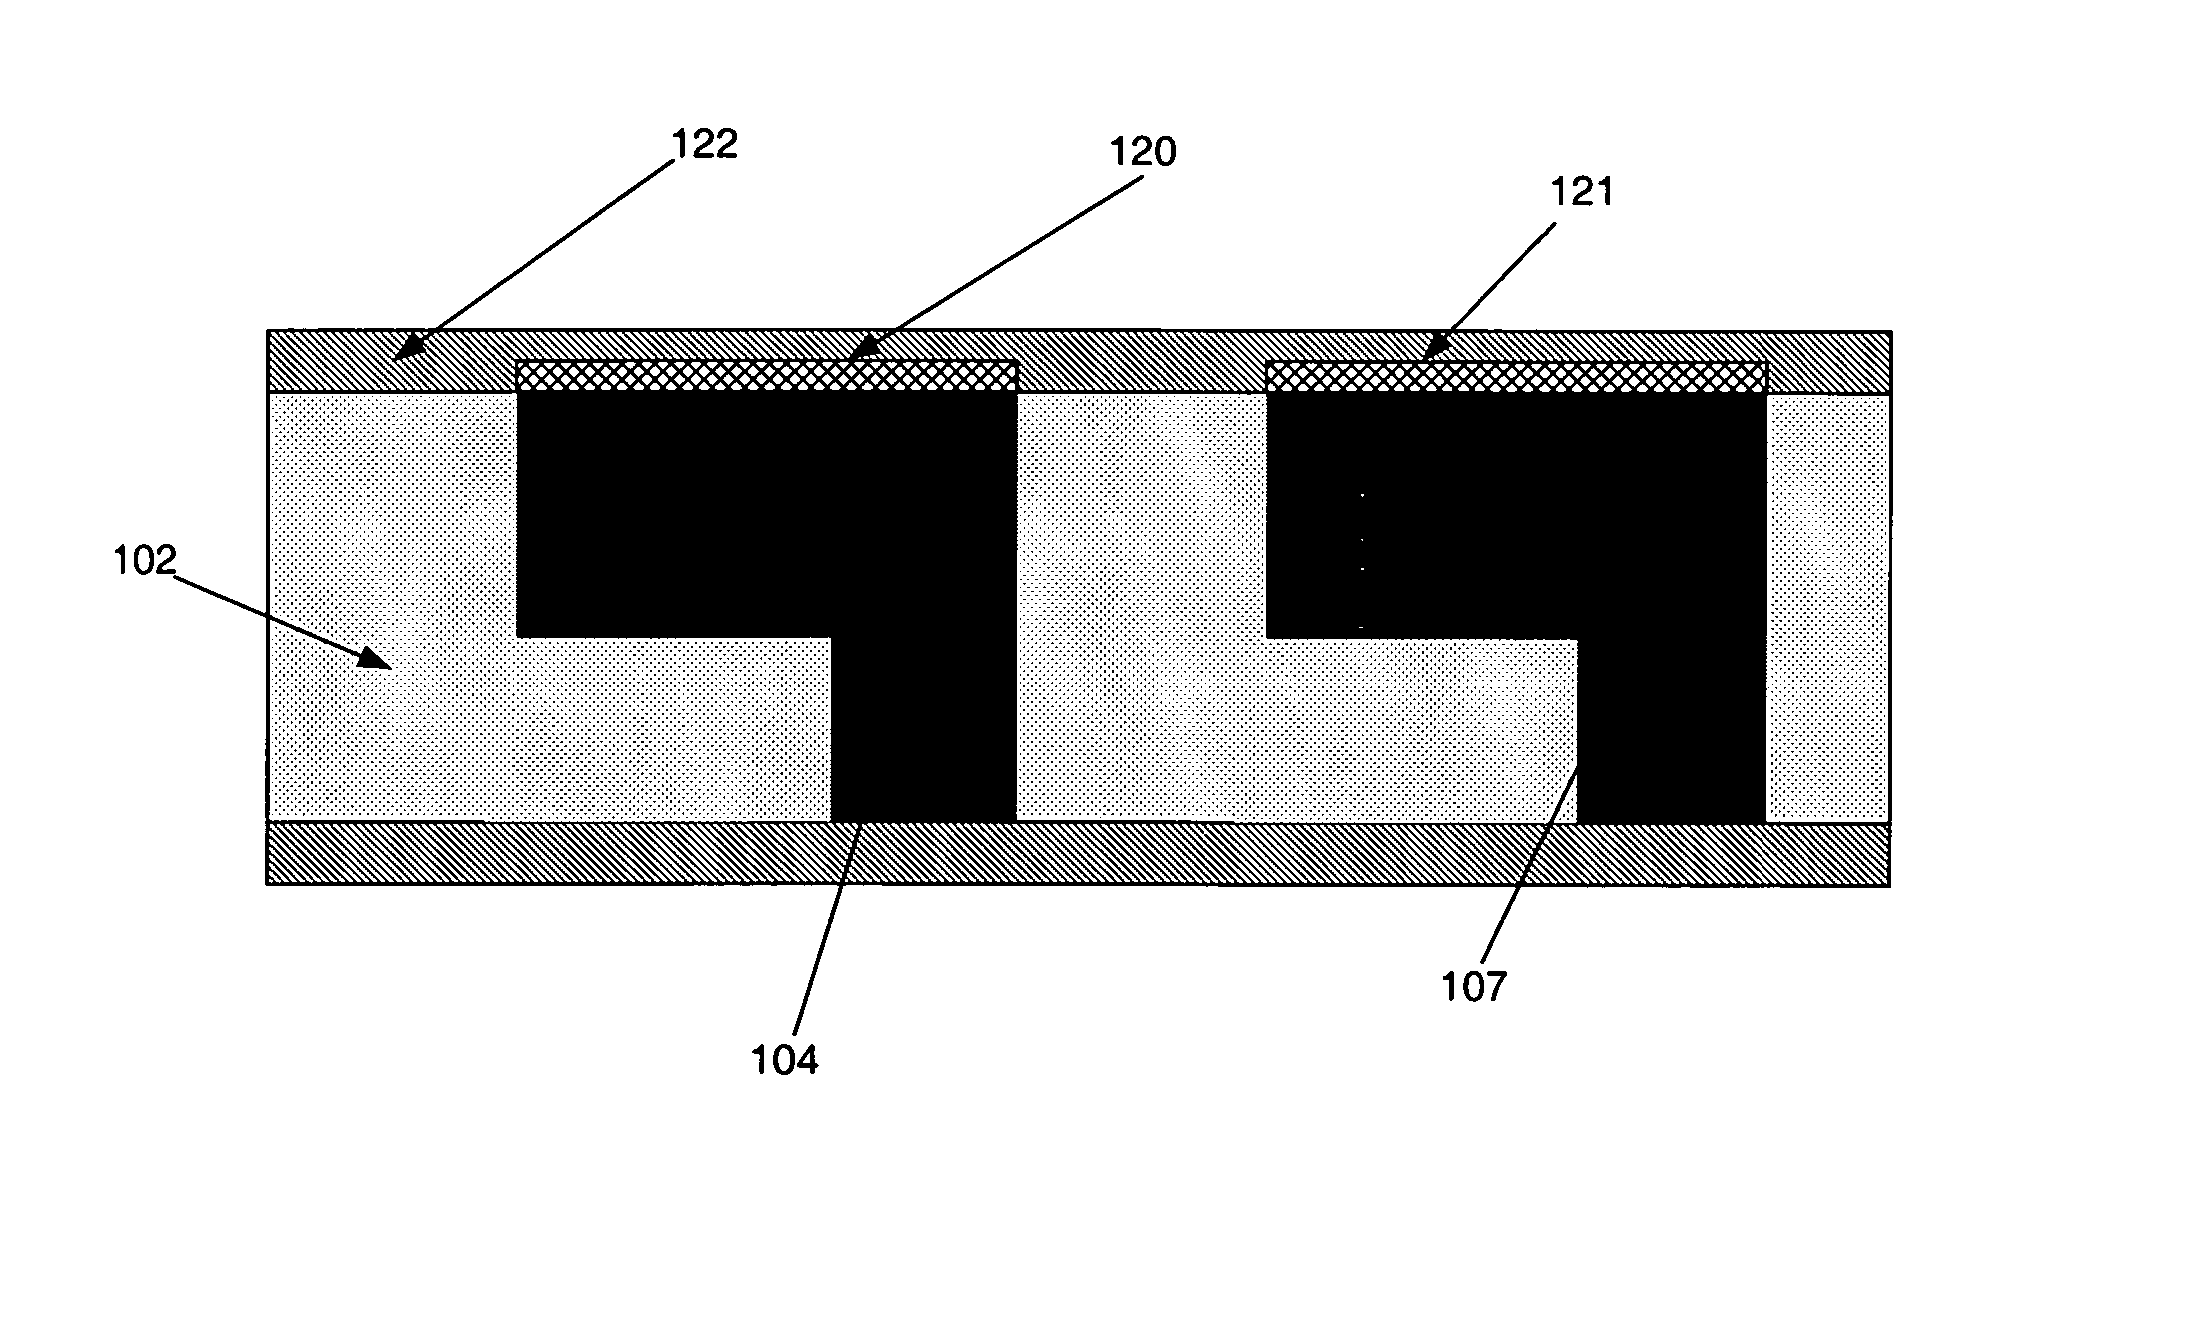 Method of forming a selectively converted inter-layer dielectric using a porogen material